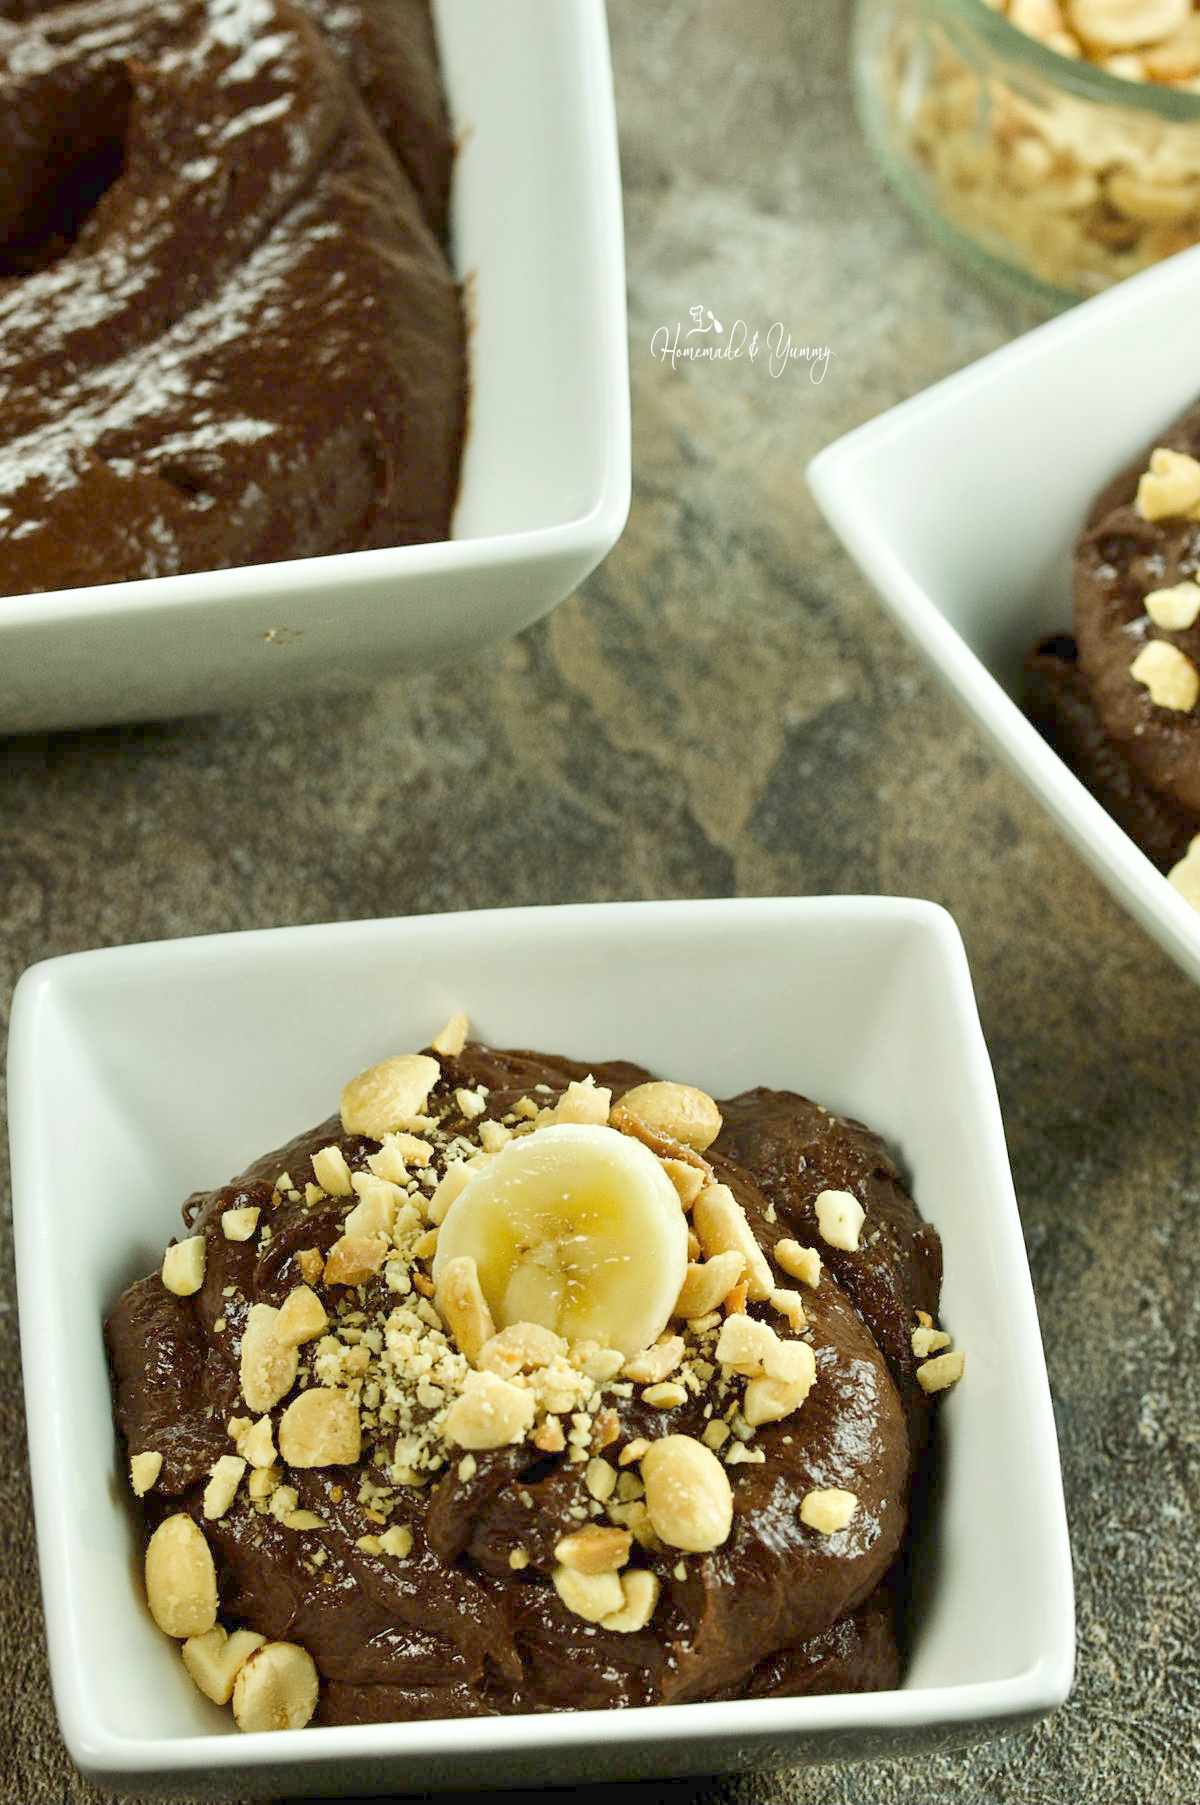 Healthy Chocolate Banana Pudding in a bowl garnished with peanuts and banana slices.